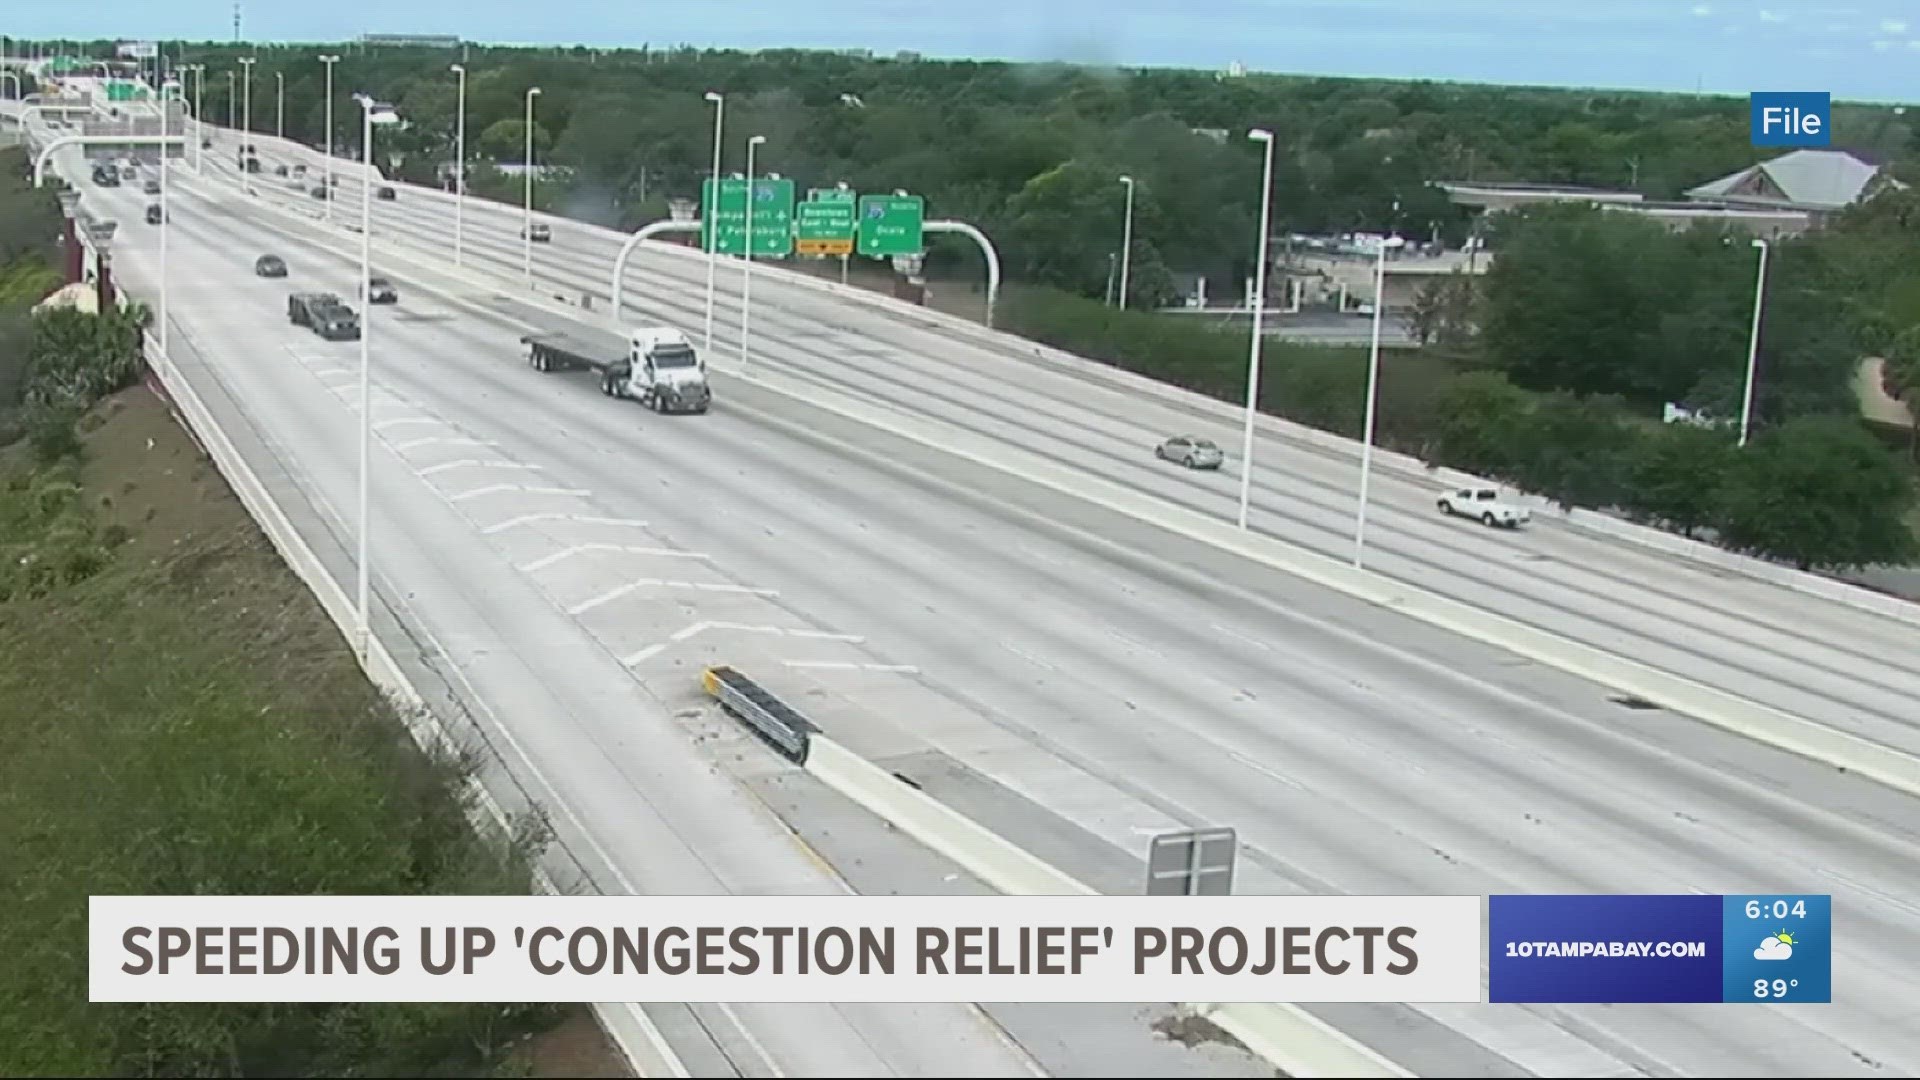 The "Moving Florida Forward" initiative includes 20 "congestion relief" projects across the state.